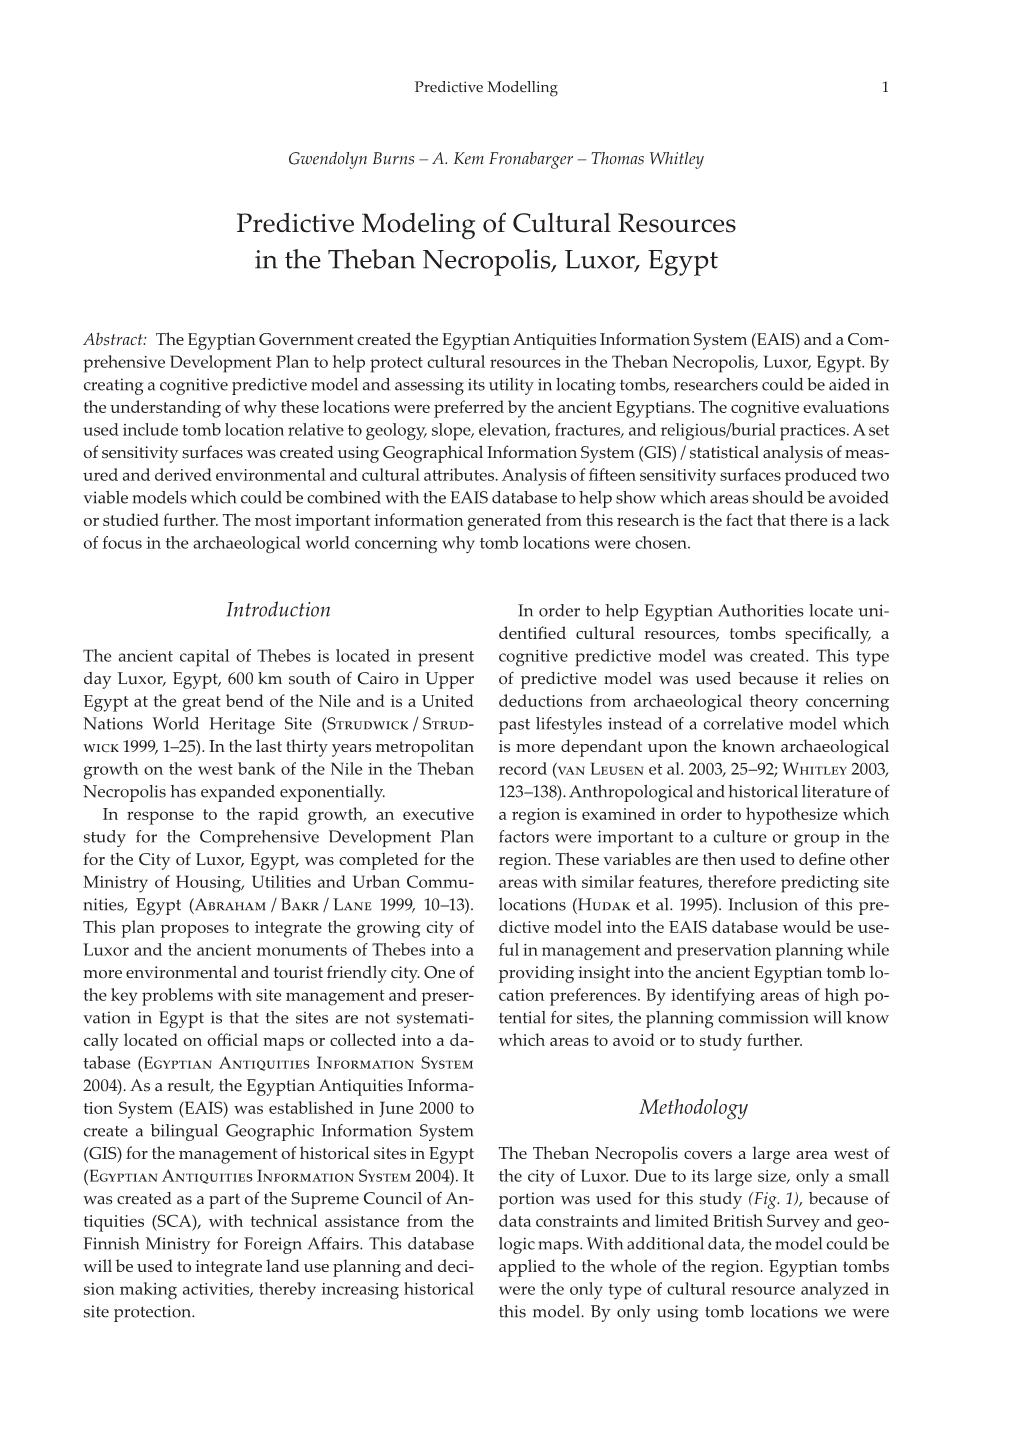 Predictive Modeling of Cultural Resources in the Theban Necropolis, Luxor, Egypt